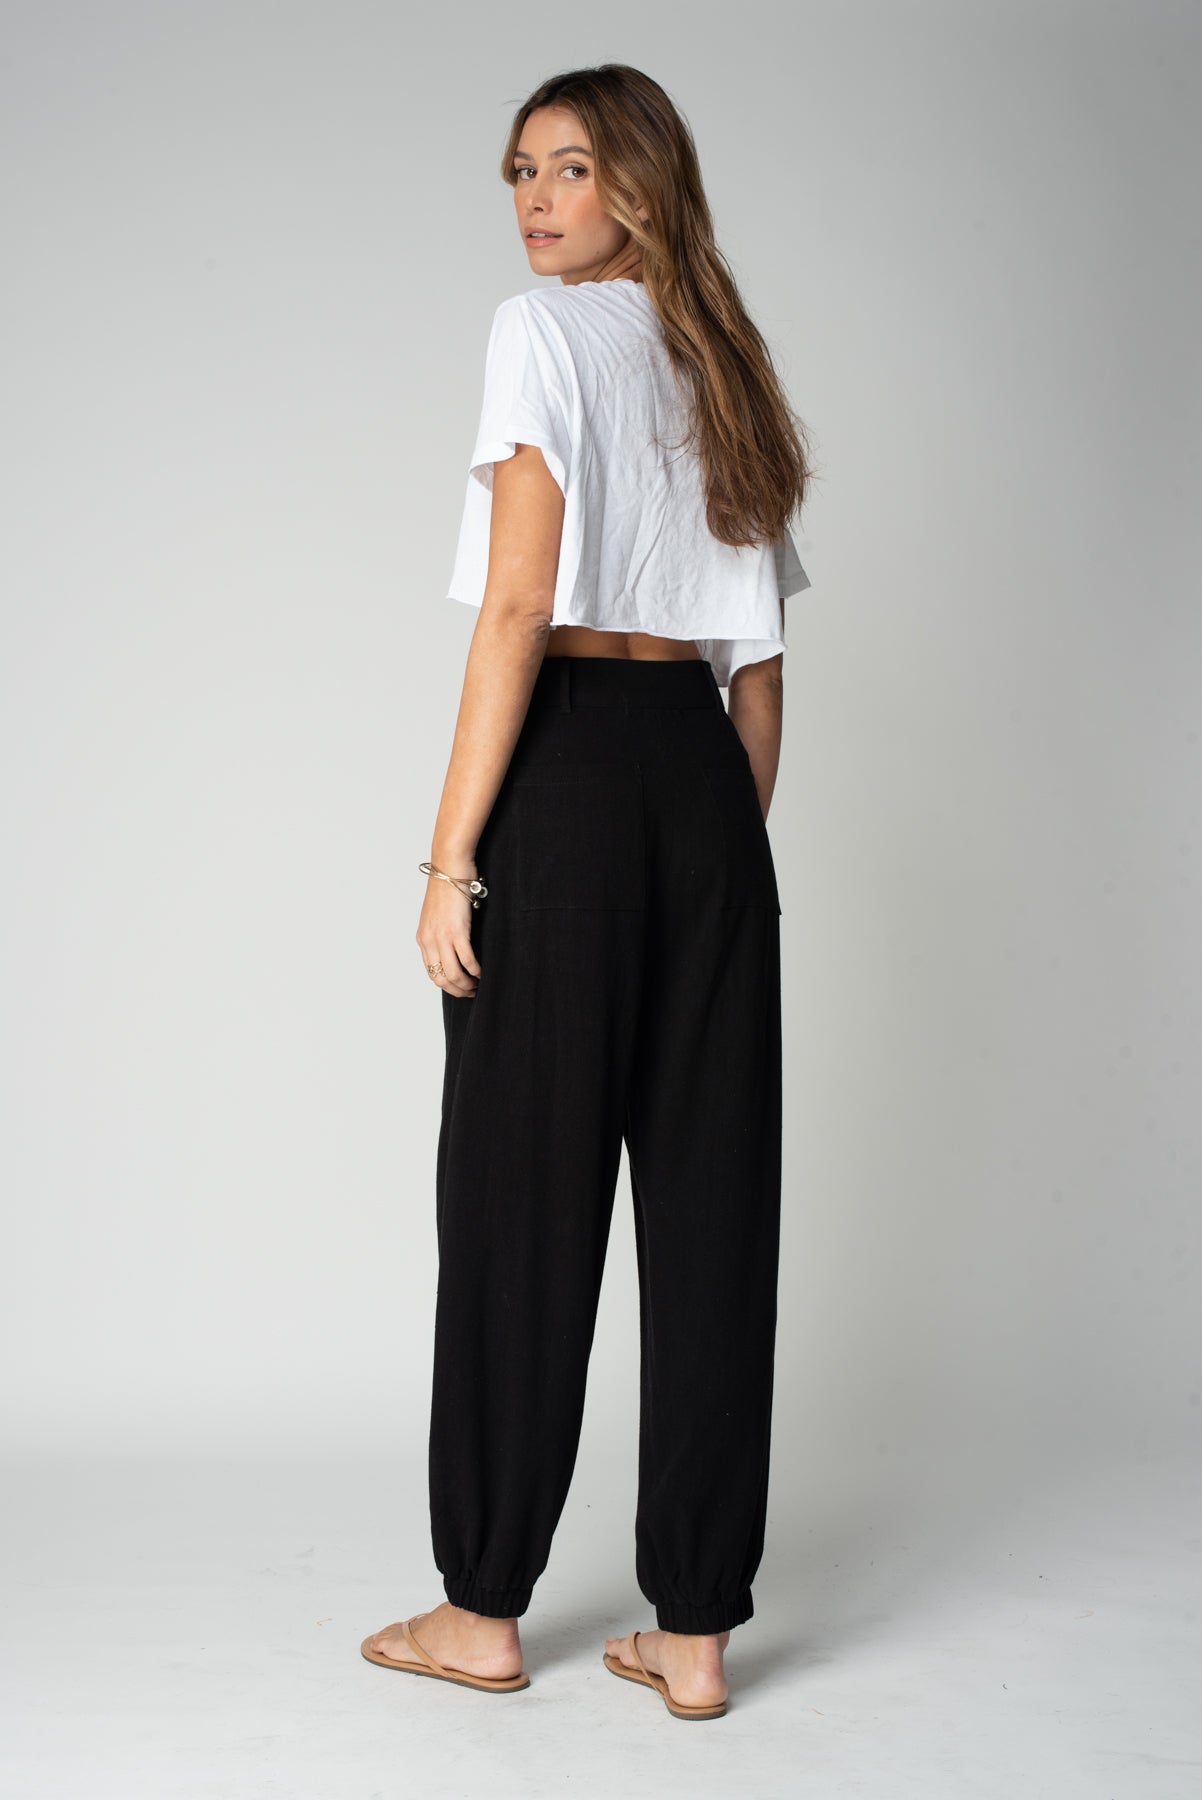 THE DYLAN PANT